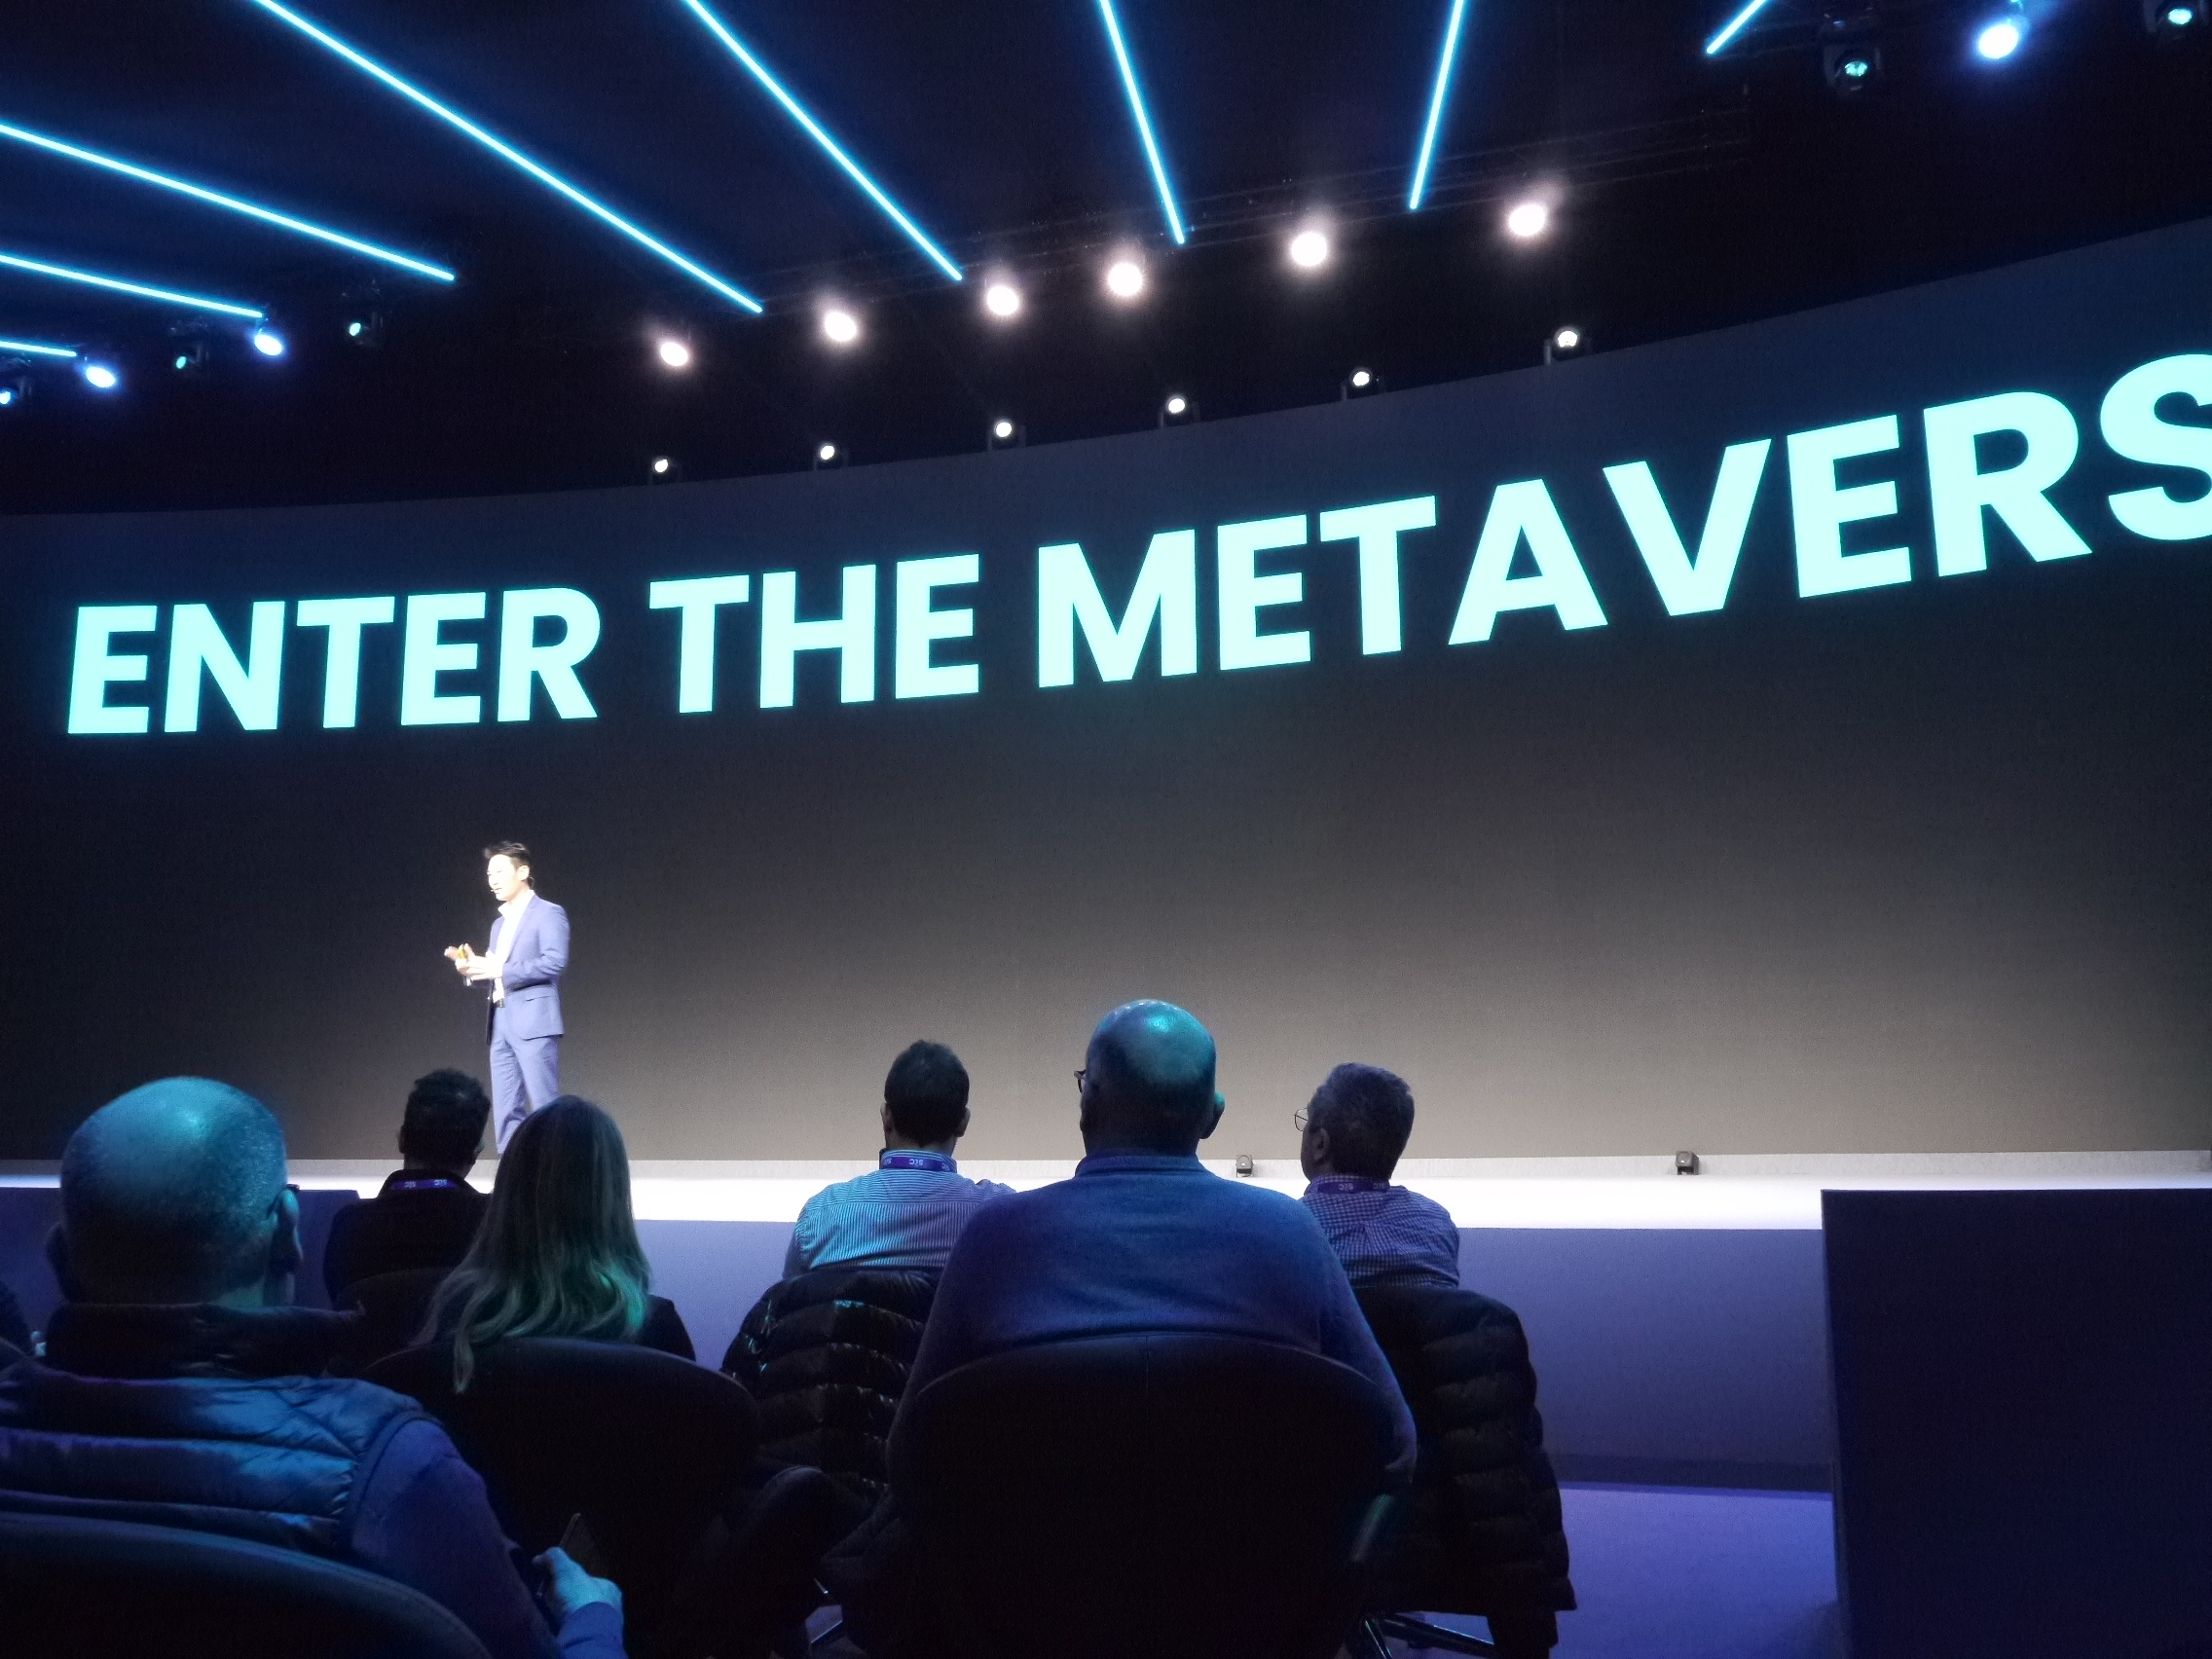 Enter the metaverse keynote session at MWC 2023